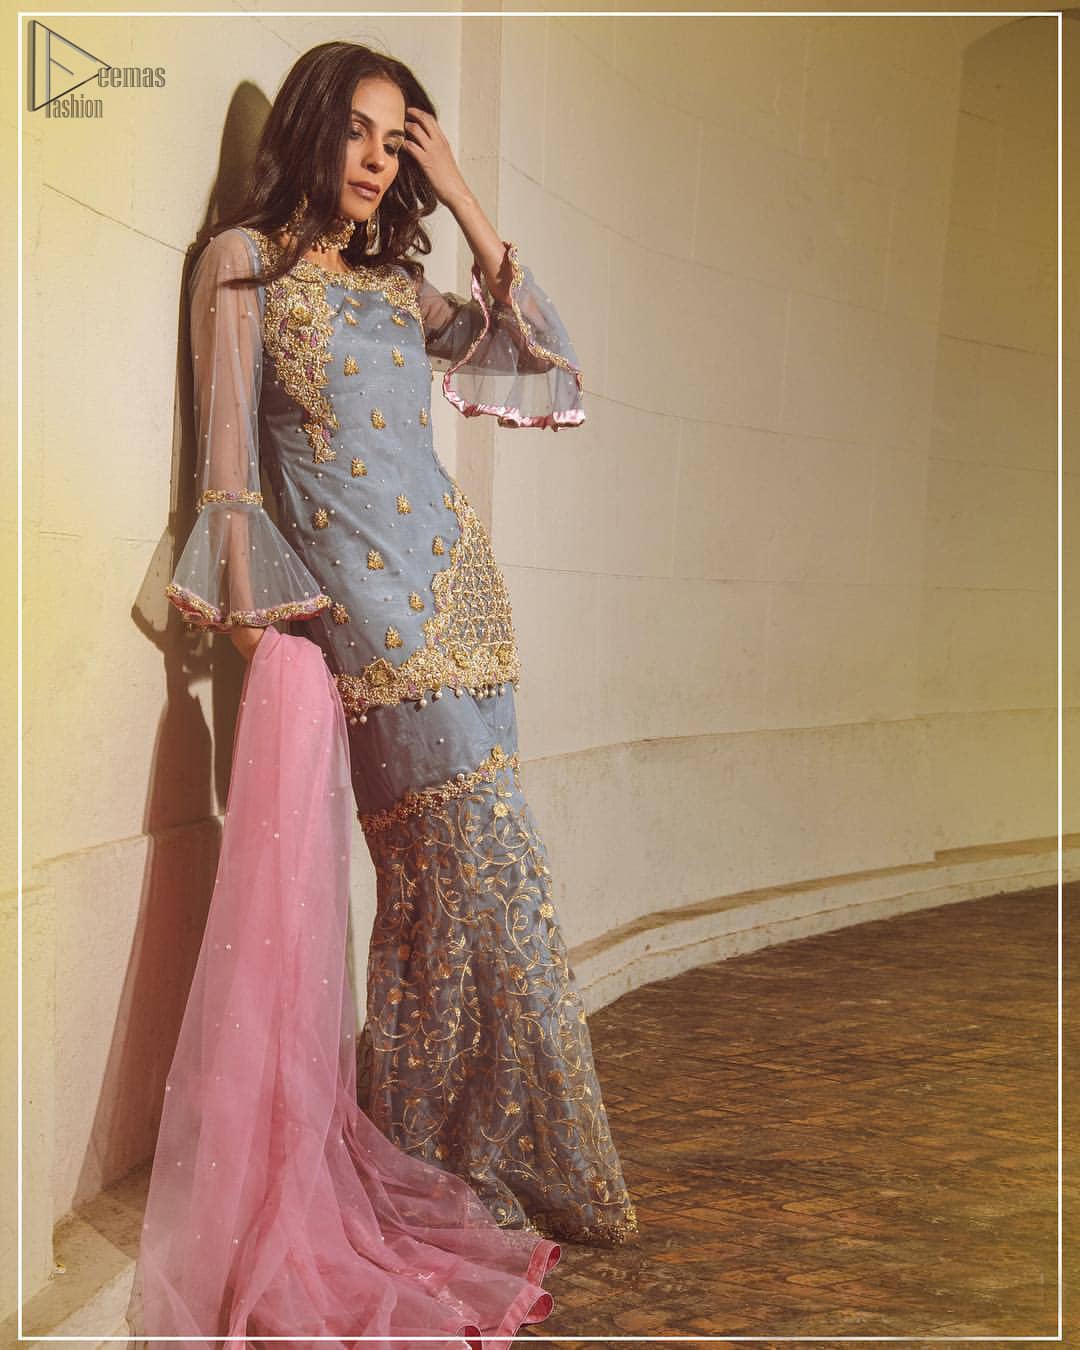 Embrace the season of festivities with this beautiful dress. The chic yet elegant outfit is decorated with golden embroidery, embellished neckline and tiny floral motifs. Borders are even more enhanced with golden zardozi detailed patterns and finished with scallops and dangling balls. Pair it up with gray sharara highlighted with floral jaal and scalloped bottom done with golden kora, dabka and tilla work. The look is complete with pink net dupatta sprinkled with sequins all over.